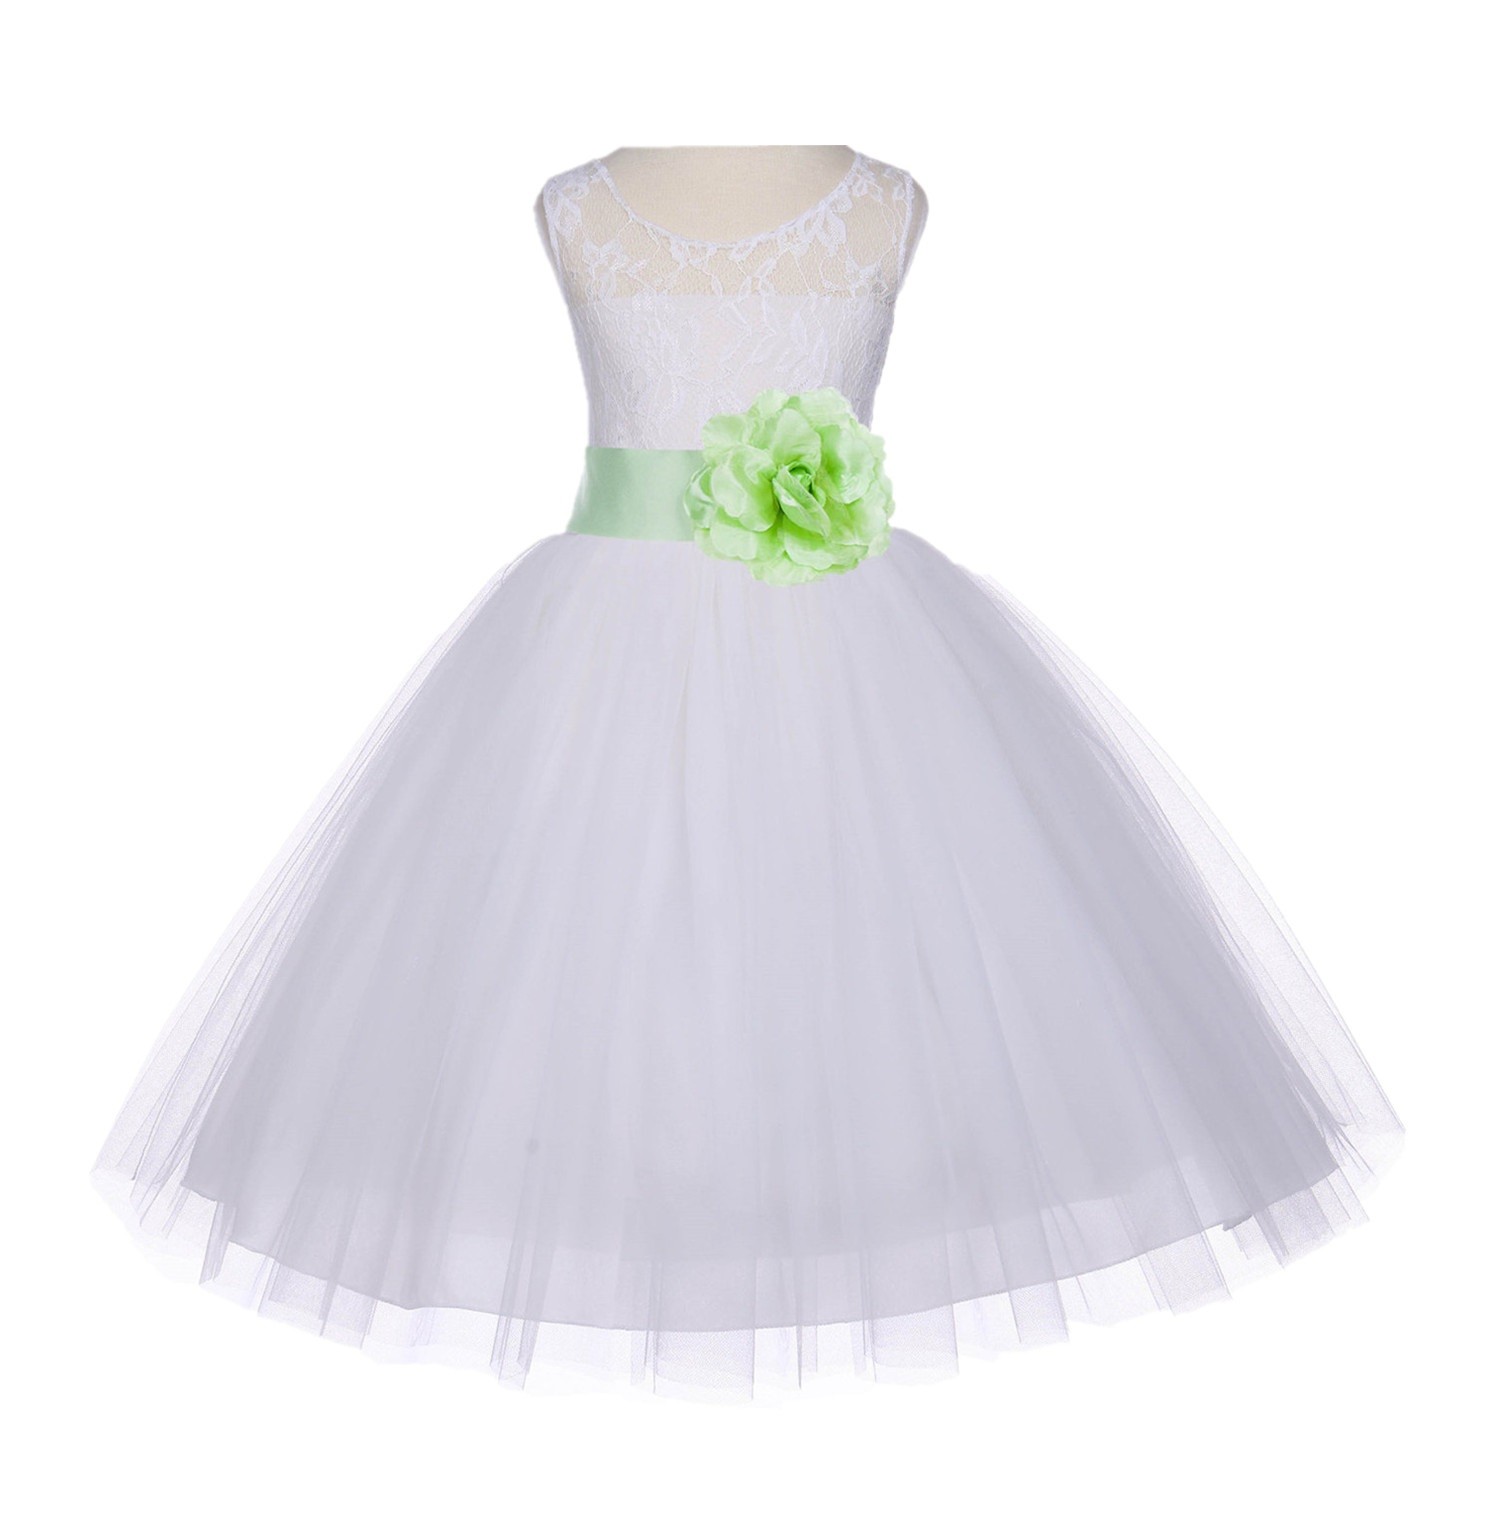 Ivory/Apple Green Floral Lace Bodice Tulle Flower Girl Dress Bridesmaid 153S